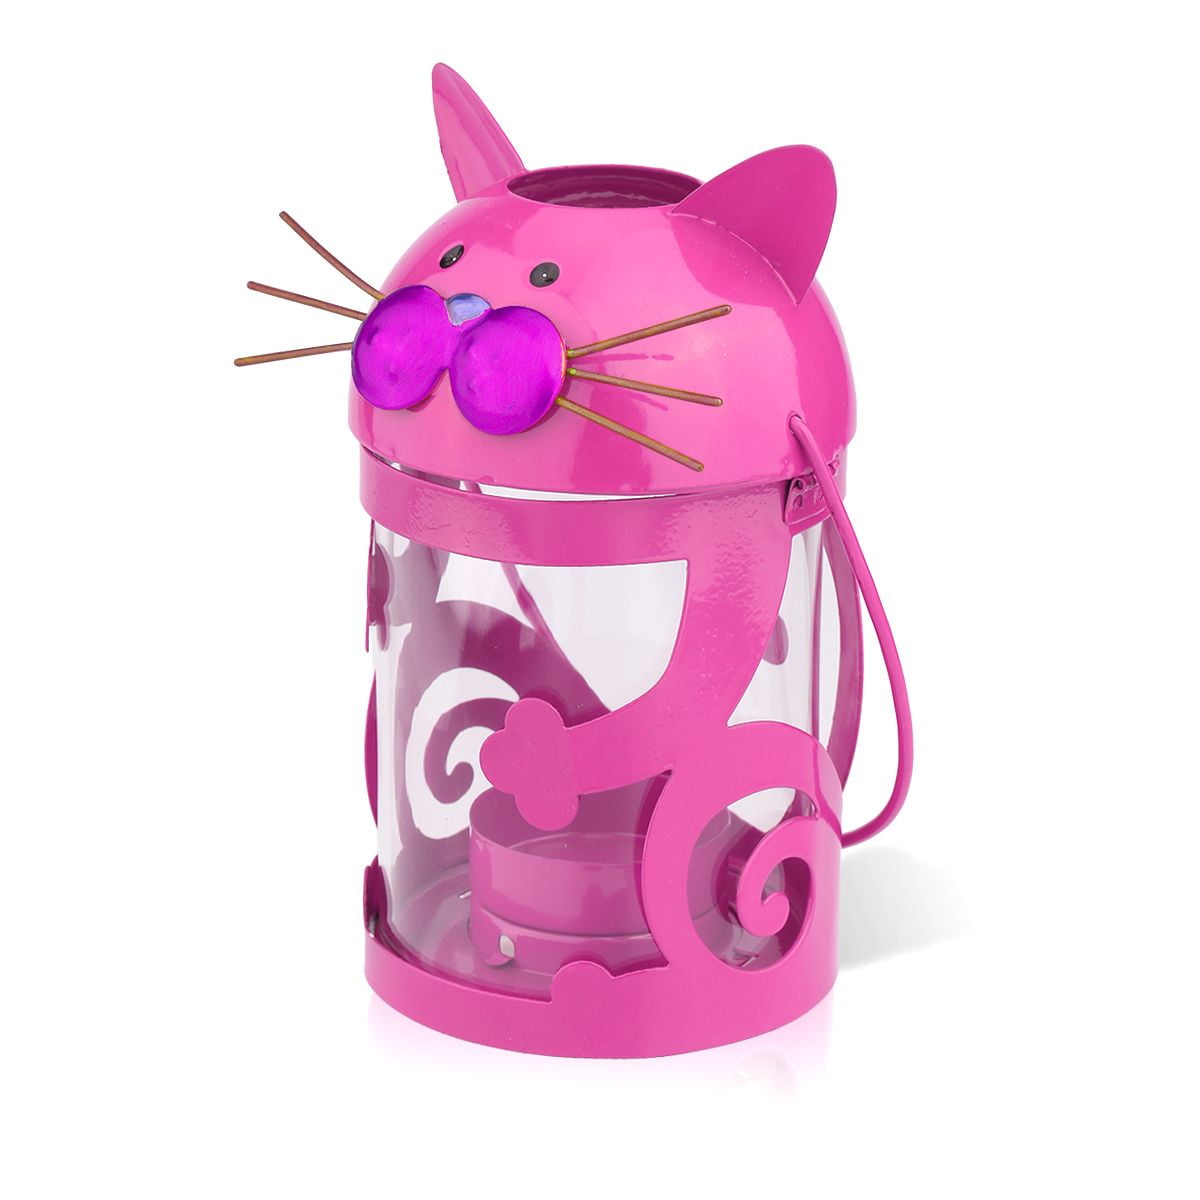 Cat candle holder Hurricane lamp Practical ornament  ornament N8T5 pink 